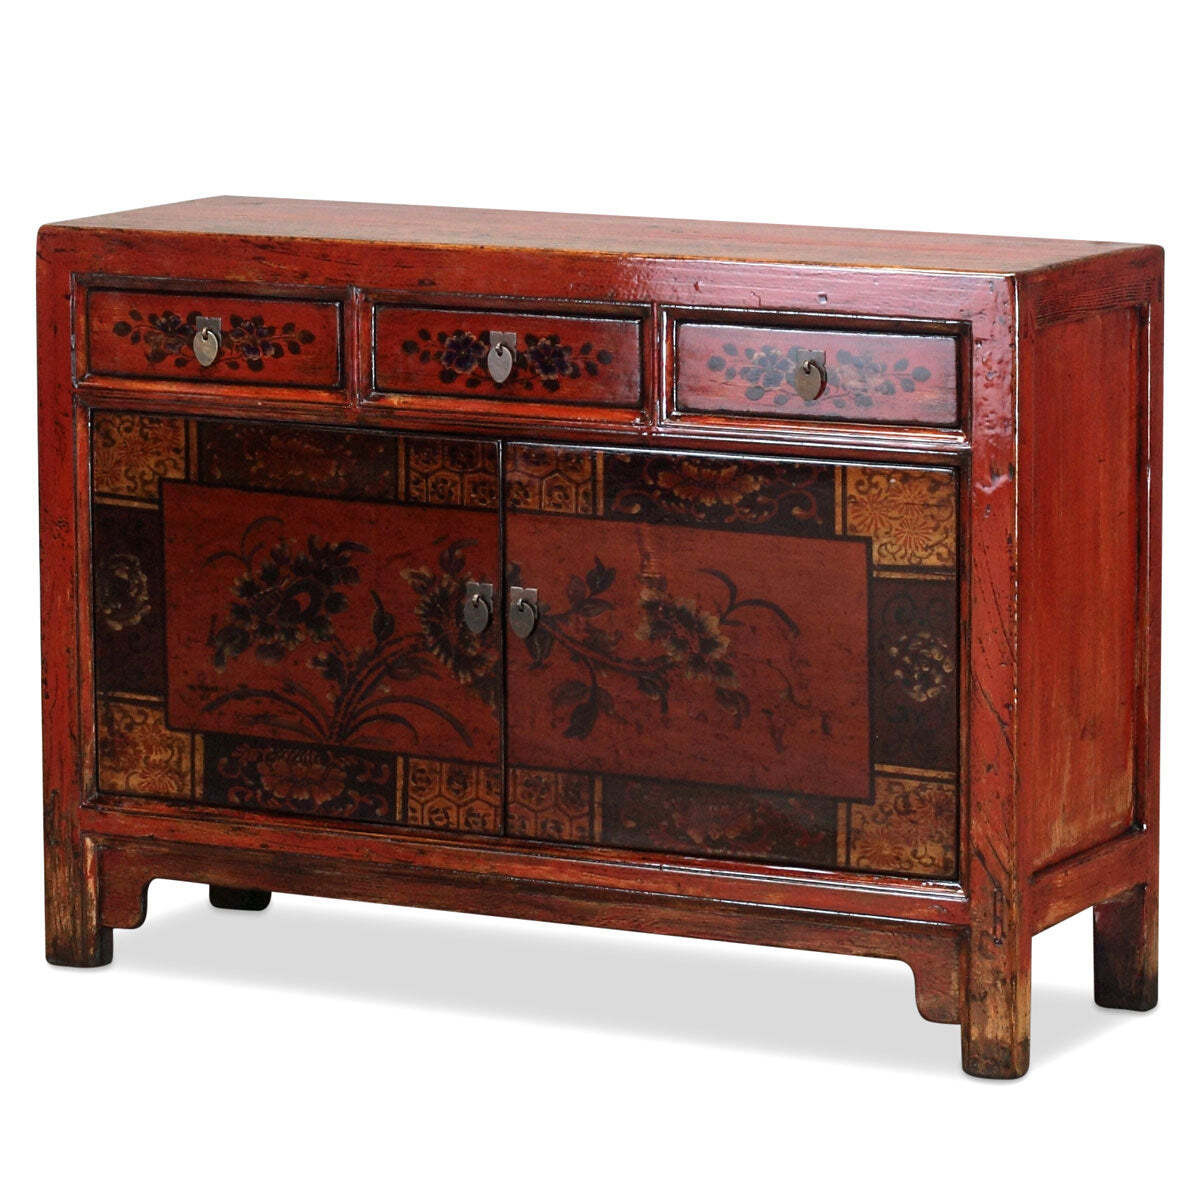 Painted Patchwork Sideboard - image 1